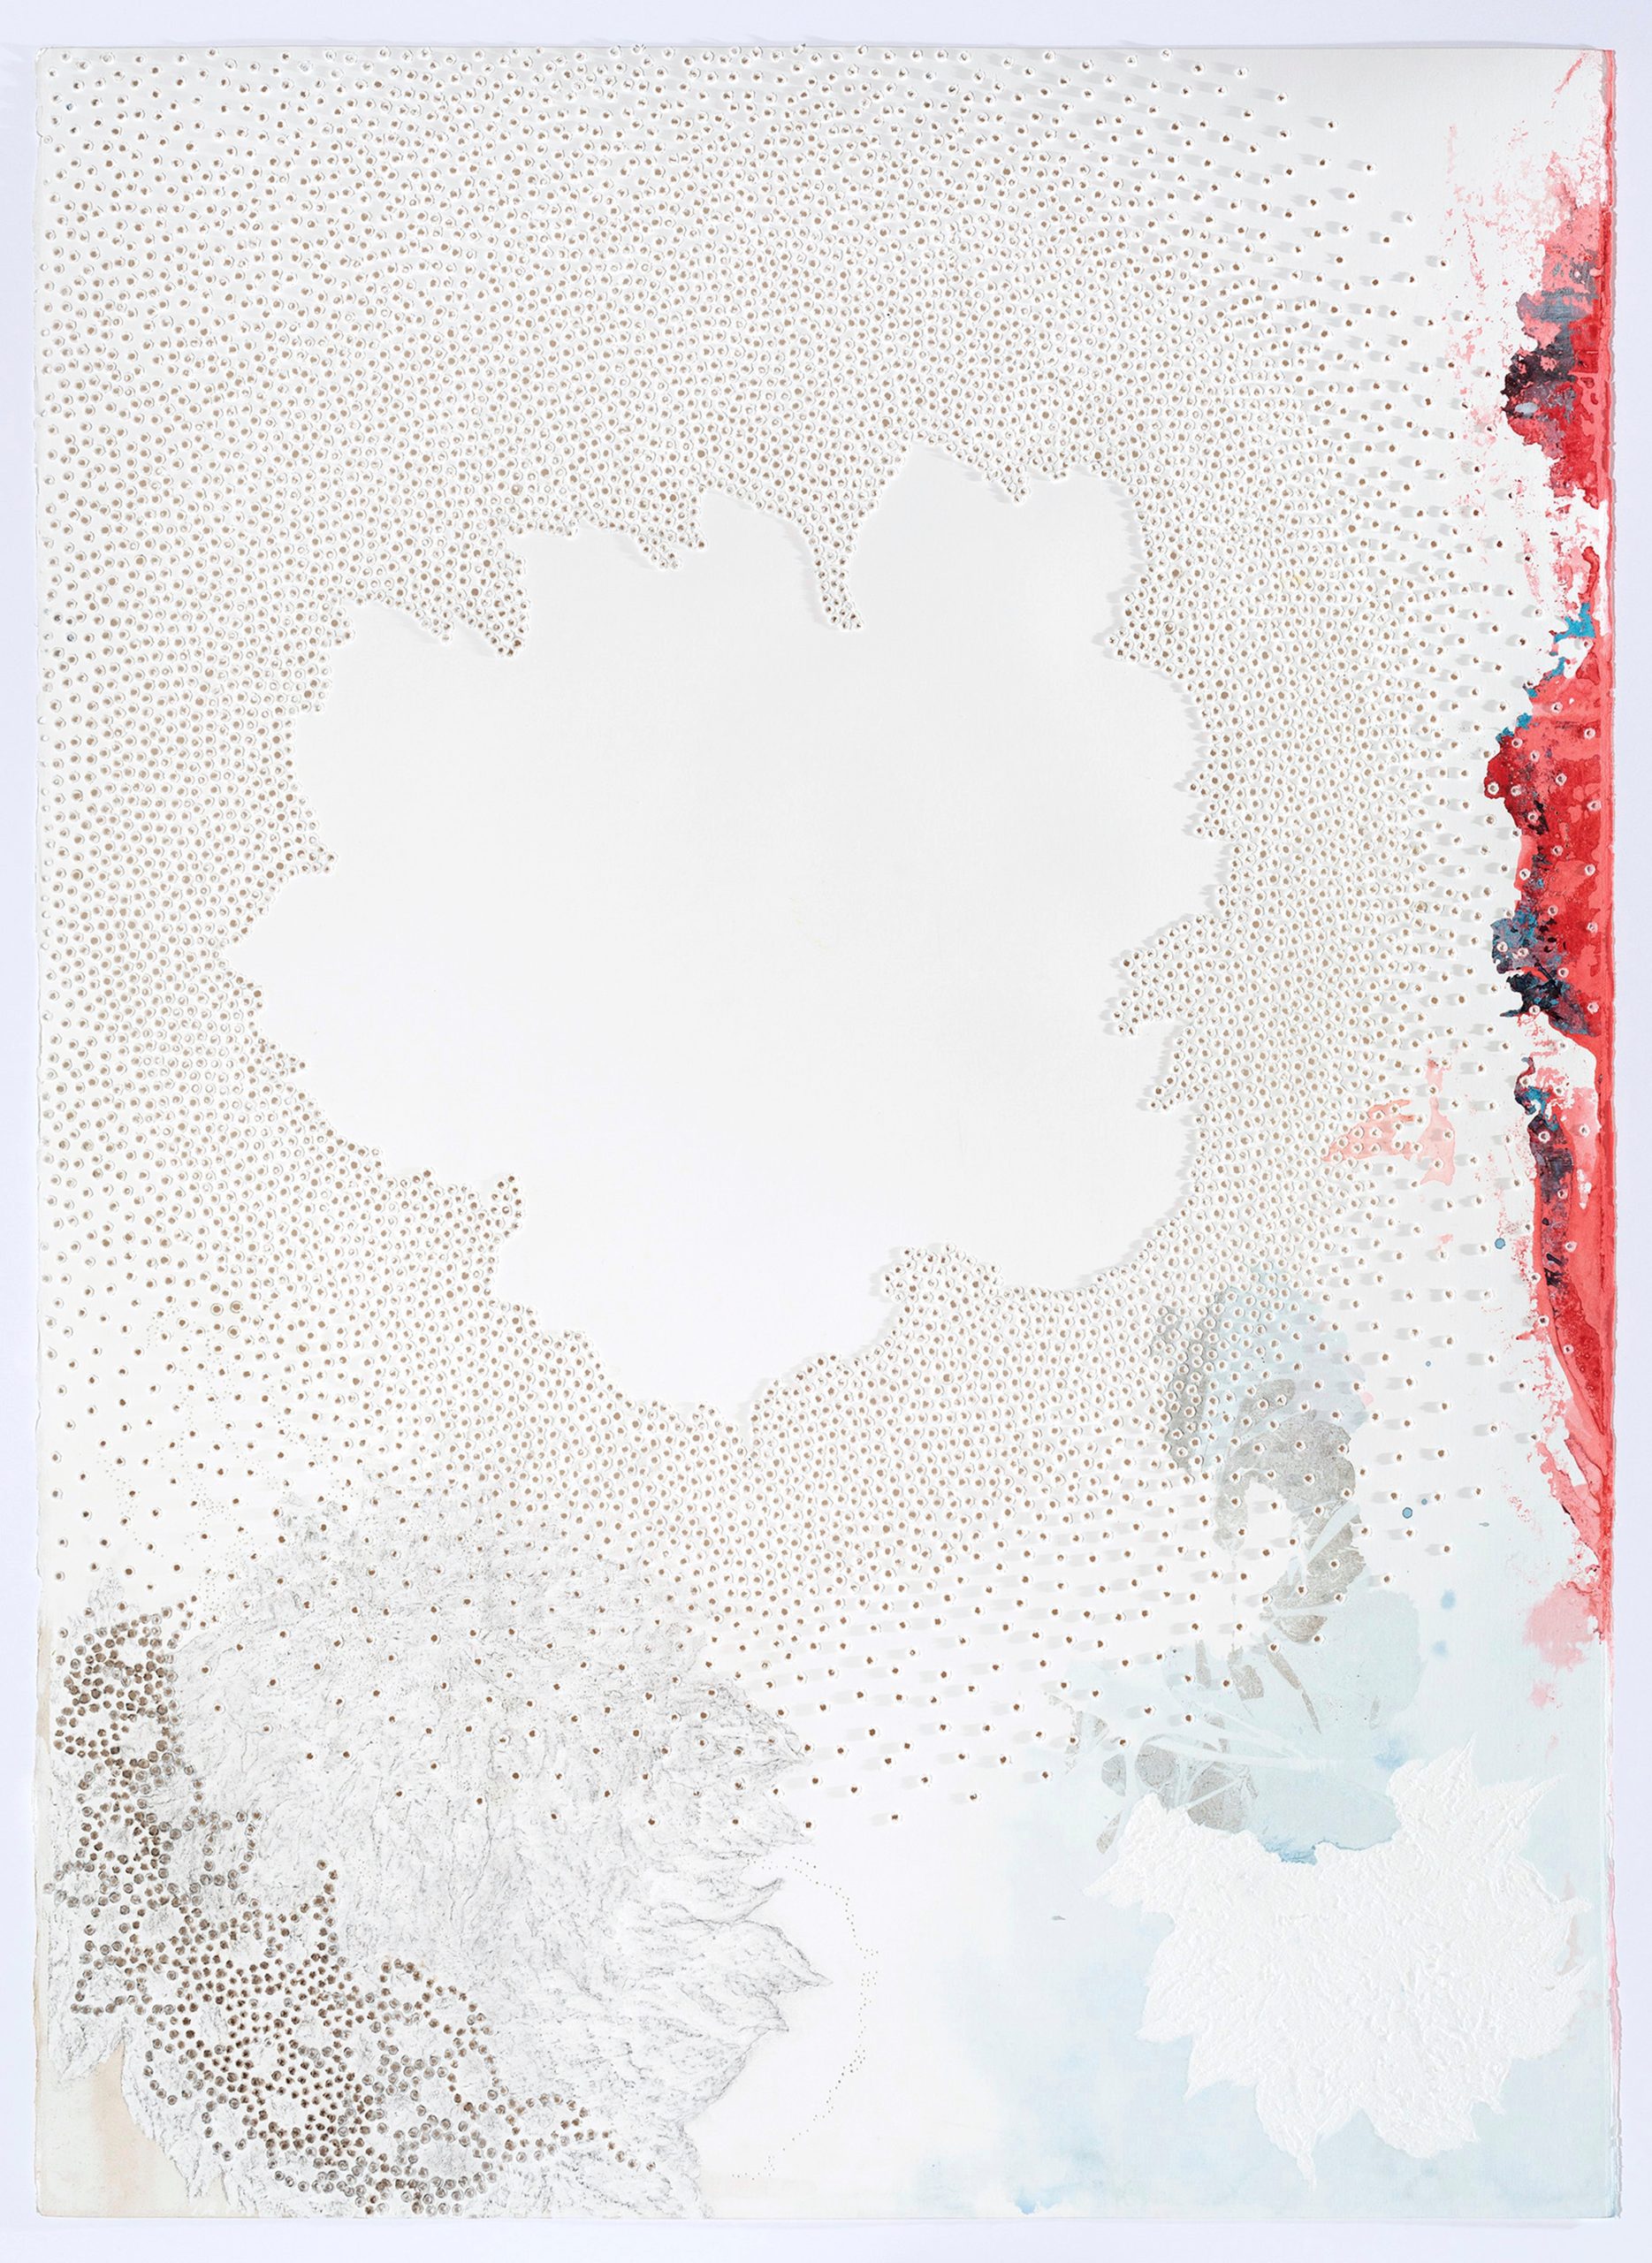 Melinda Schawel 'Pulsating' ink and pencil on torn, perforated paper 105 x 75cm